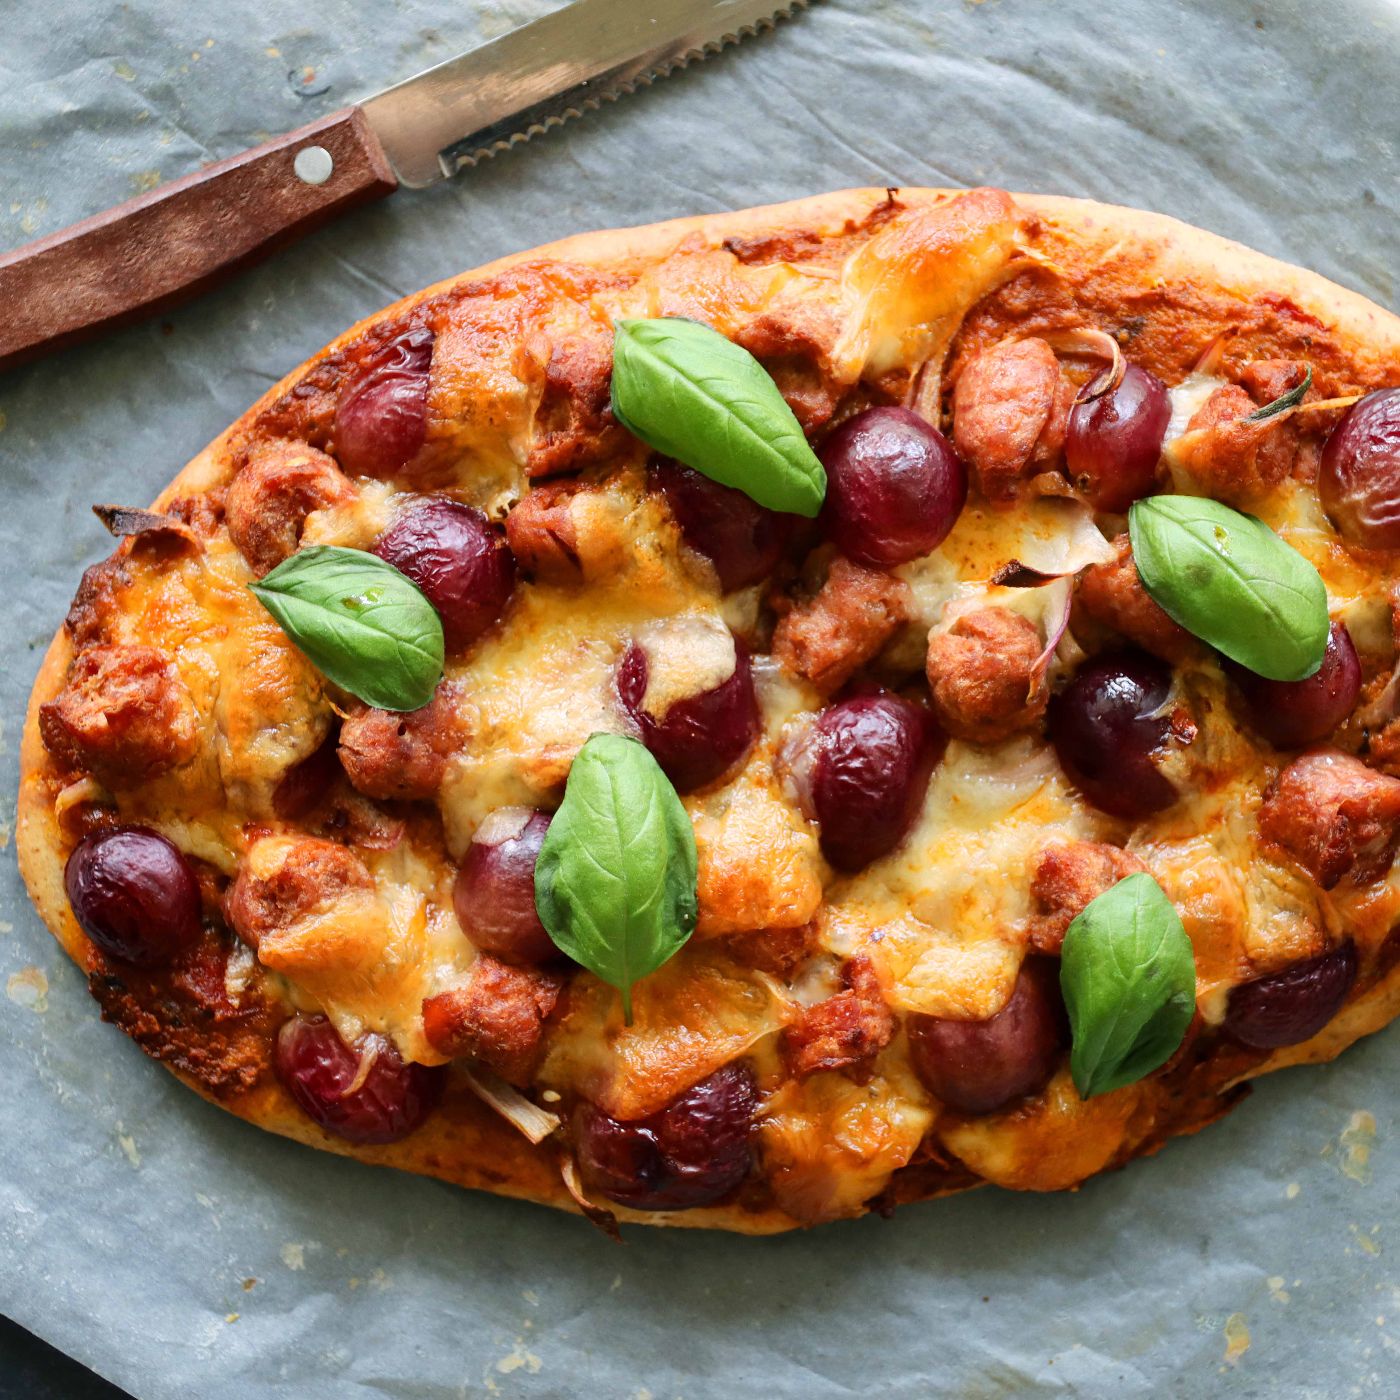 Image-of-freshly-baked-homemade-pizza-on-greaseproof-paper-with-knife,-sausage-meatballs,-grapes,-mozzarella-cheese,-basil-leaf-topping,-rich-tomato-sauce,-elevated-view,-focus-on-foreground-1329673937_6960x4640 square.jpeg